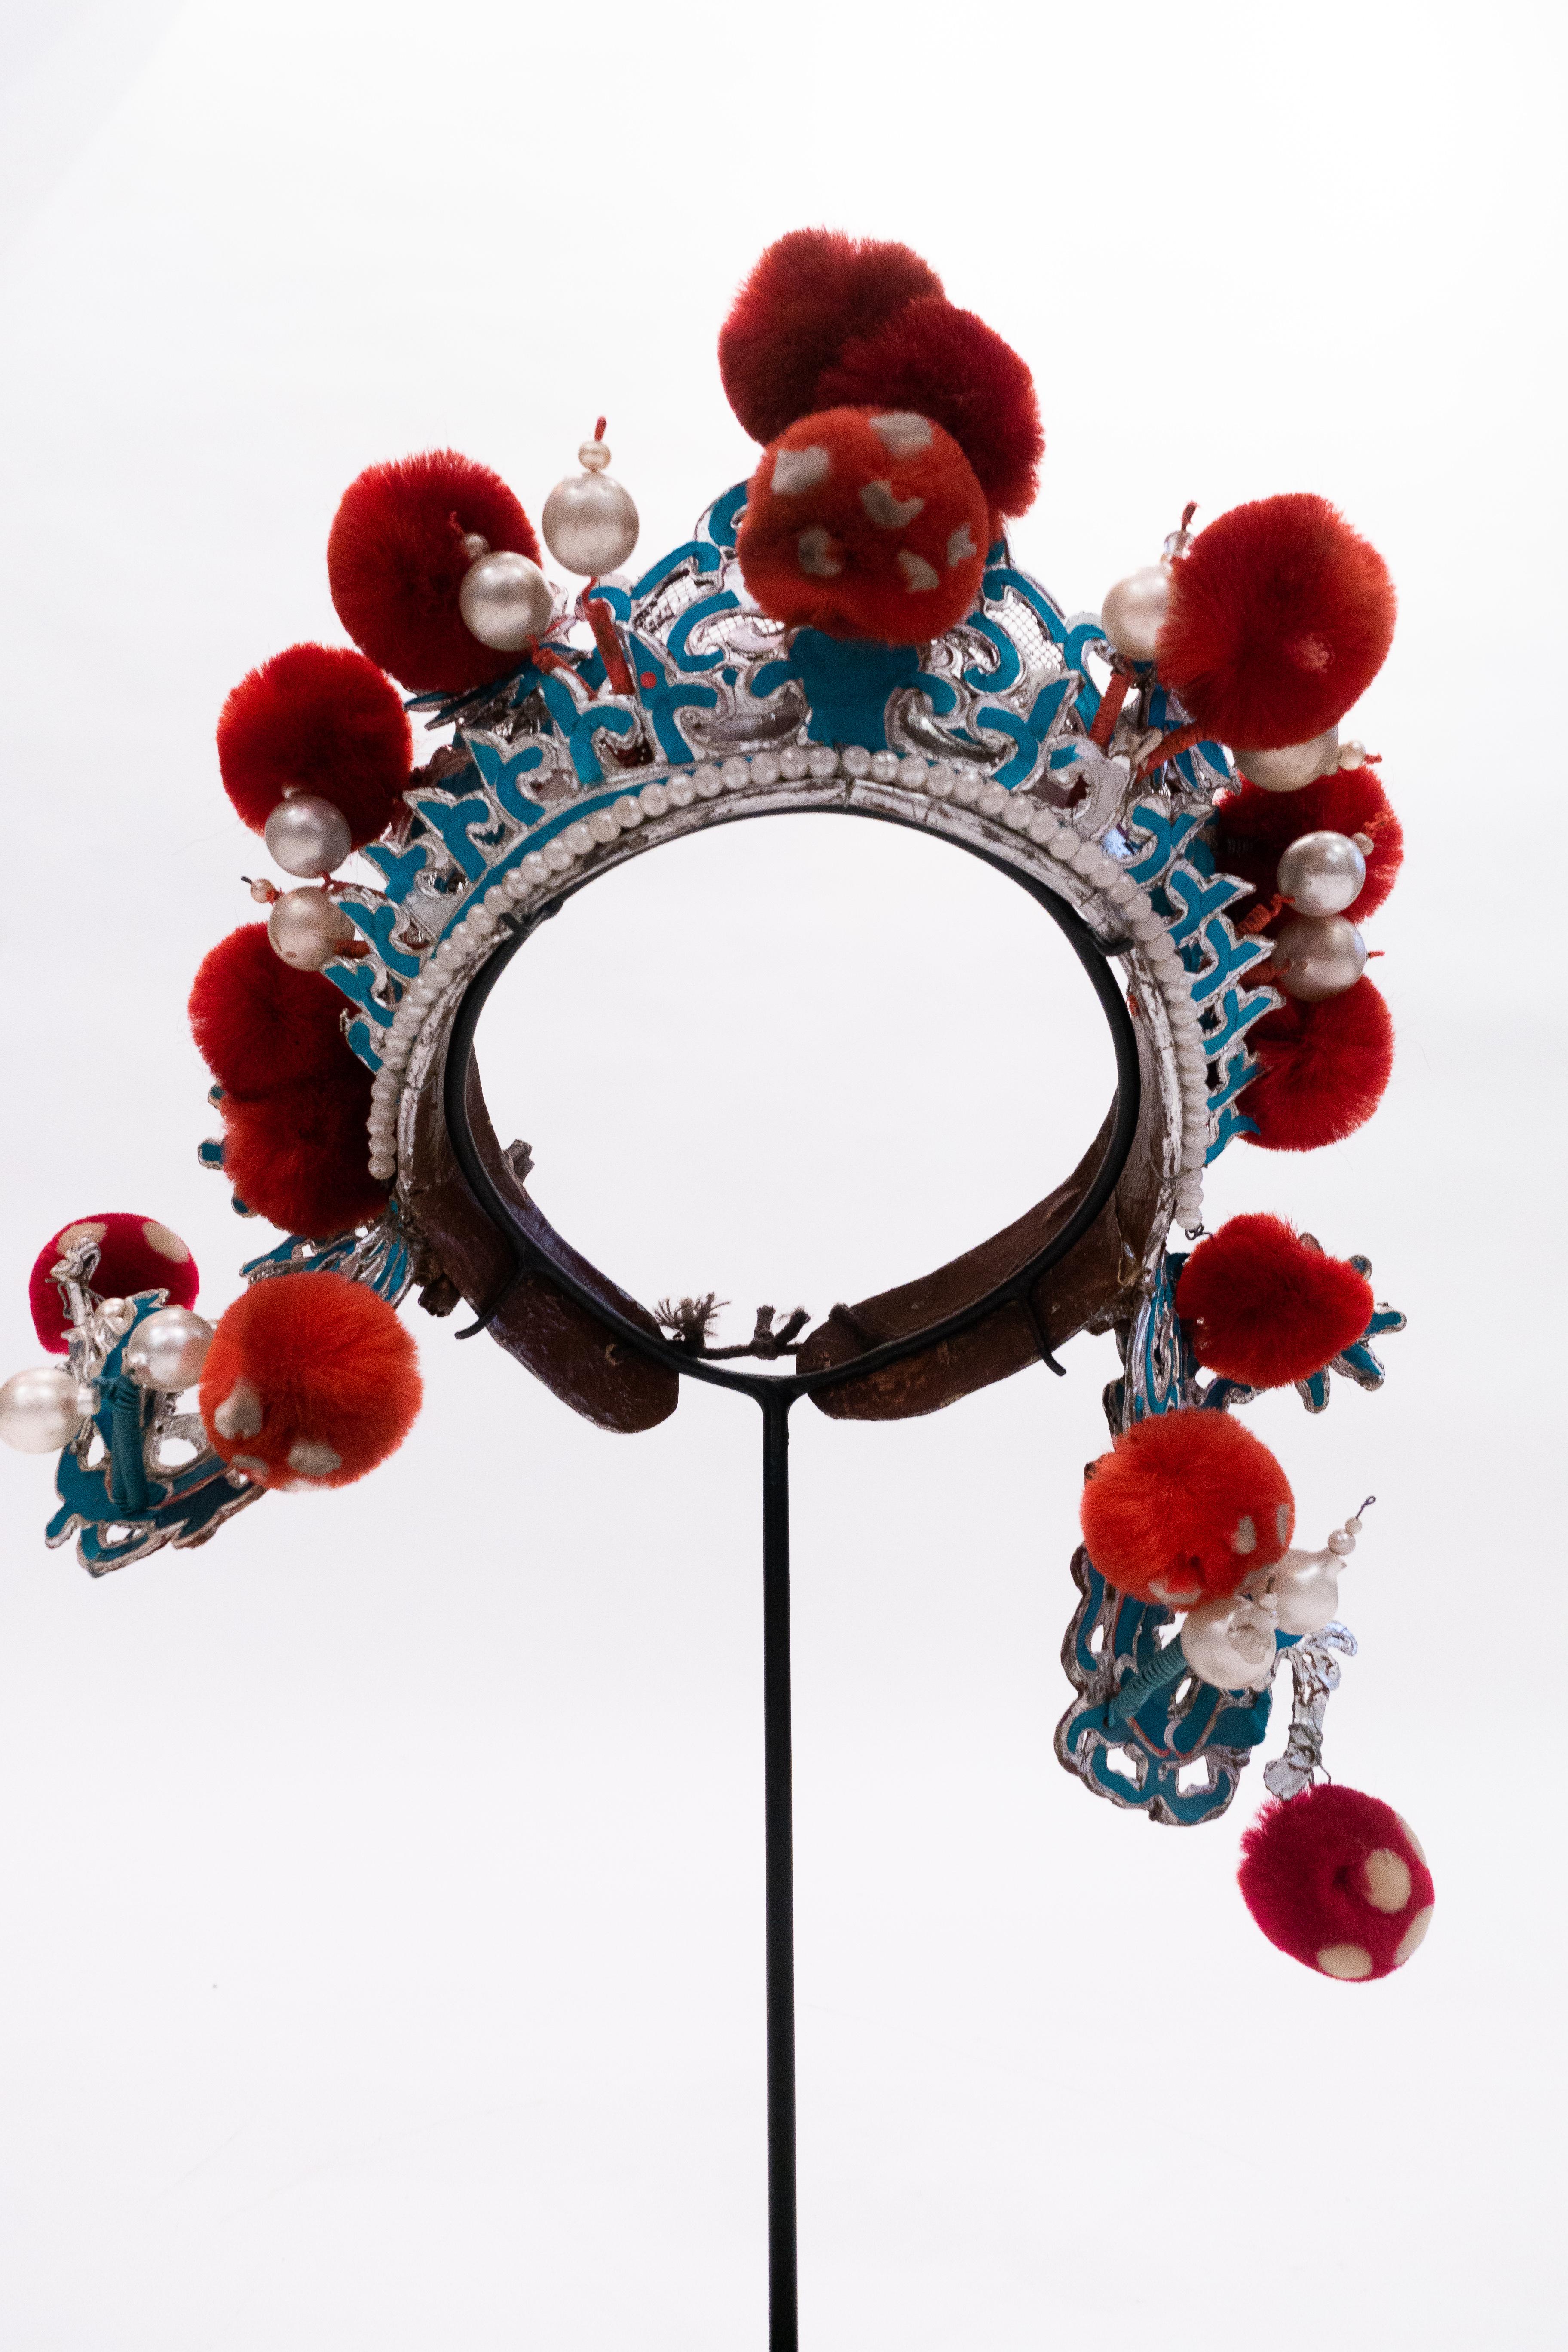 20th Century Antique Chinese Opera Theatre Headdress in Turquoise with Red Pom Poms